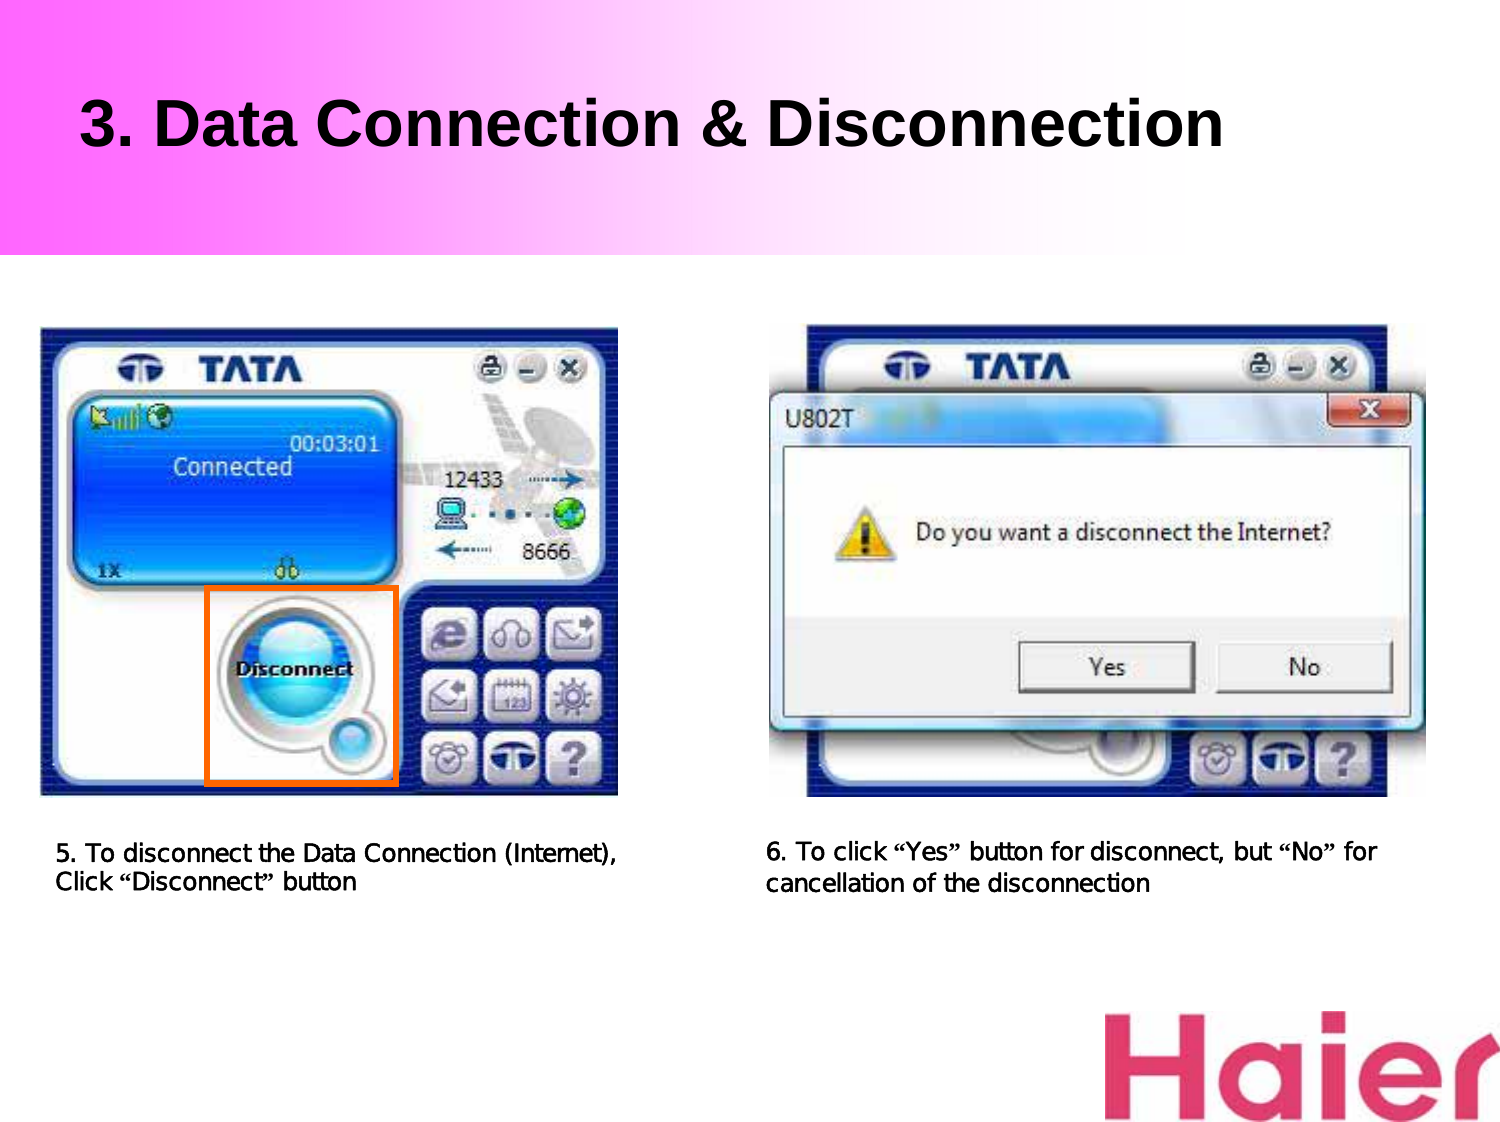 3. Data Connection &amp; Disconnection5. To disconnect the Data Connection (Internet),             Click “Disconnect”button 6. To click “Yes”button for disconnect, but “No”for cancellation of the disconnection